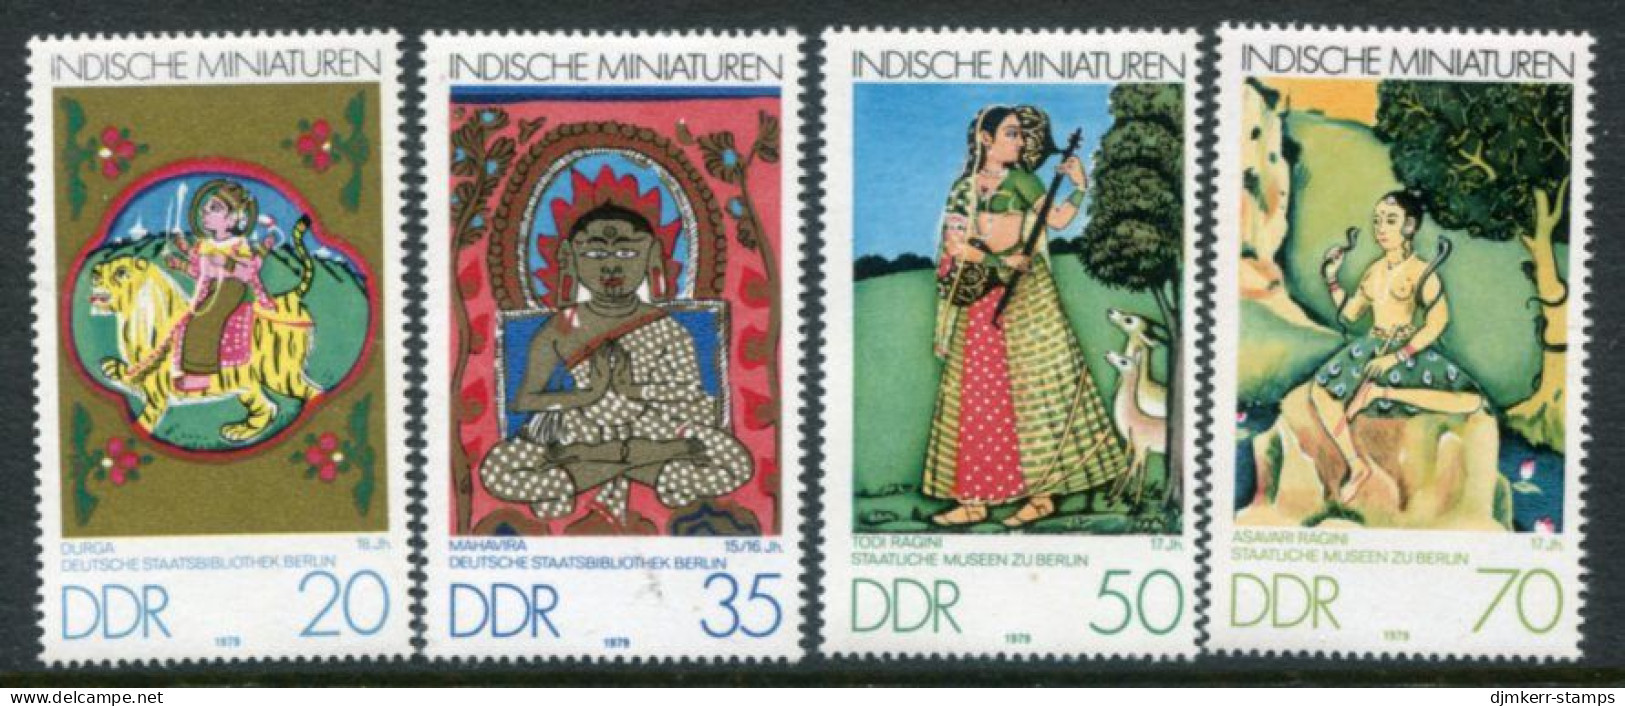 DDR / E. GERMANY 1979 Indian Miniatures MNH / **.  Michel  2418-21 - Unused Stamps